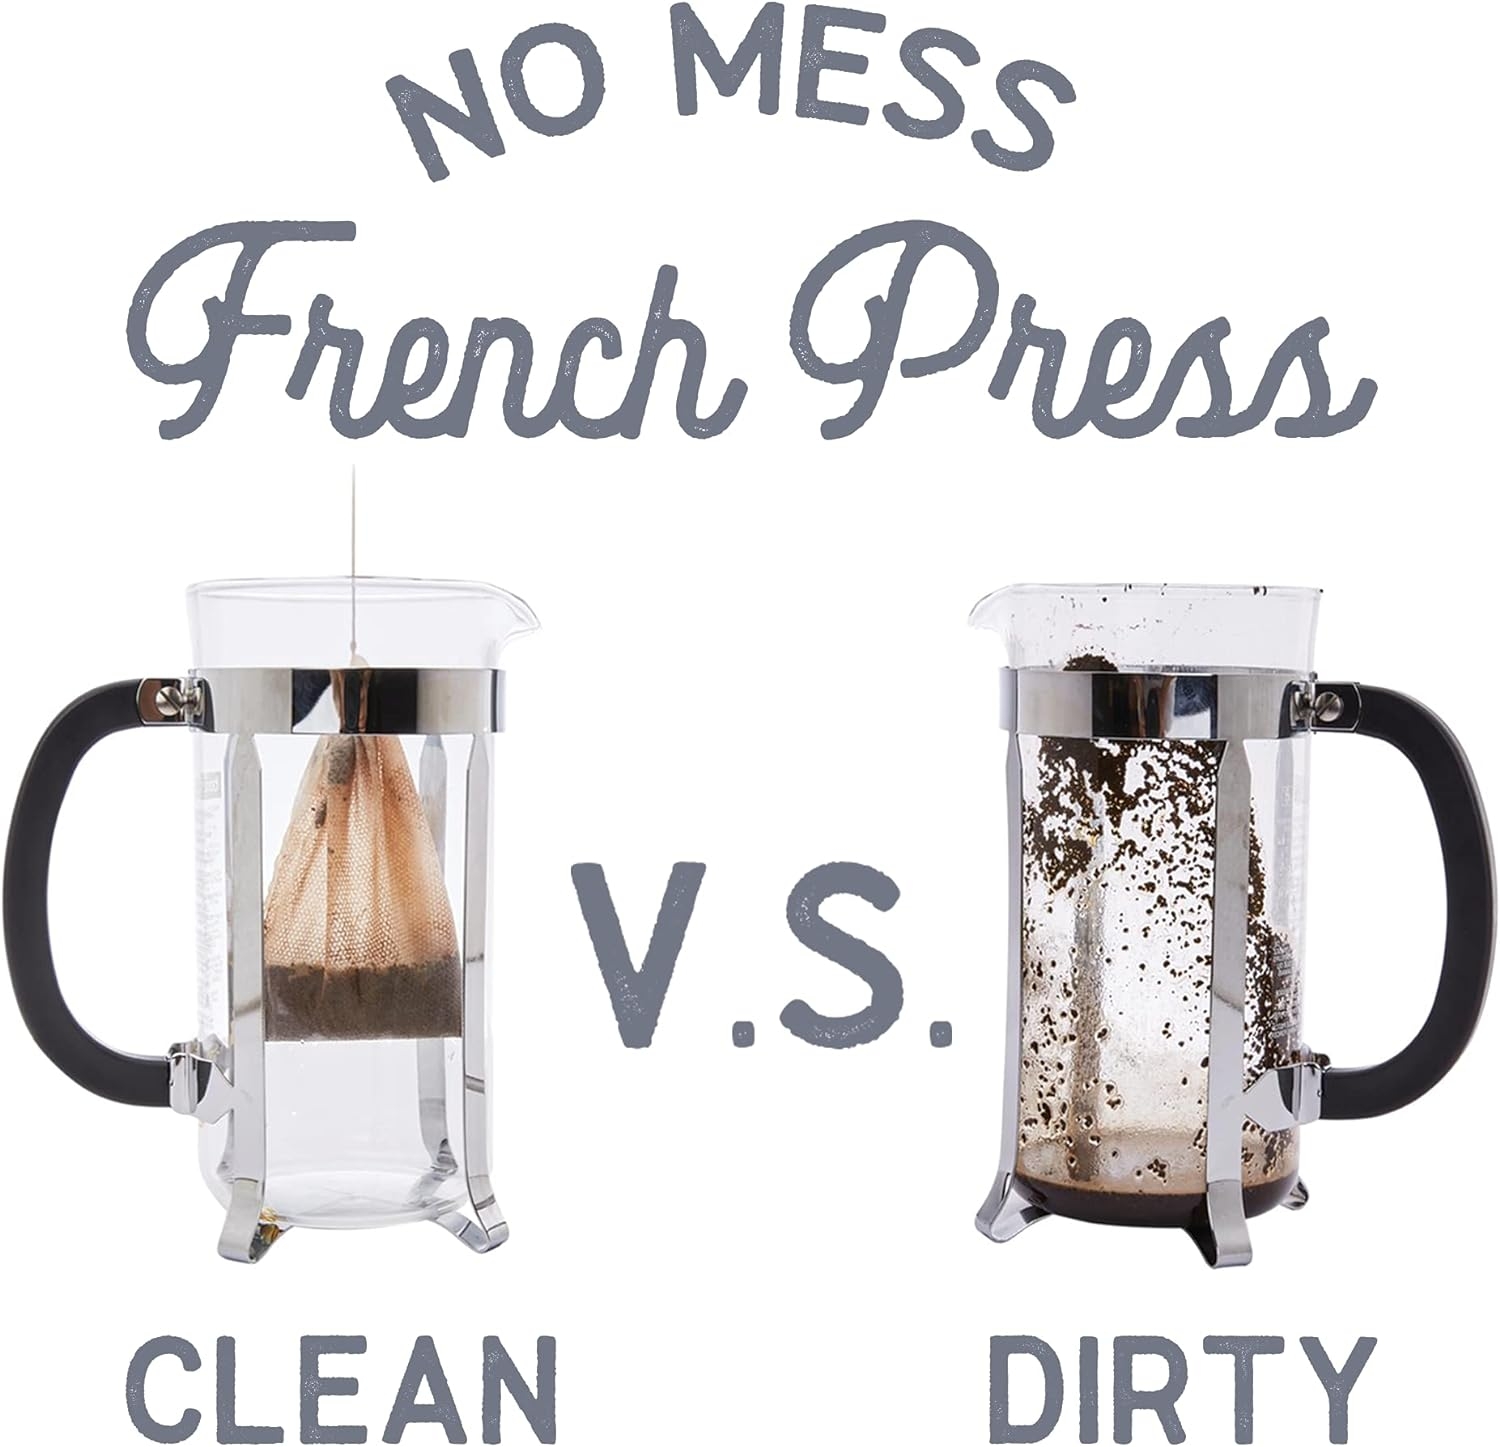 The Original French Press Brewing Bags - 50 Easy Fill Fine Mesh Disposable Coffee Filters For Your French Press Coffee Maker - Perfect for Mason Jar Cold Brew, Beer Hops, Tea, 6"x4" White